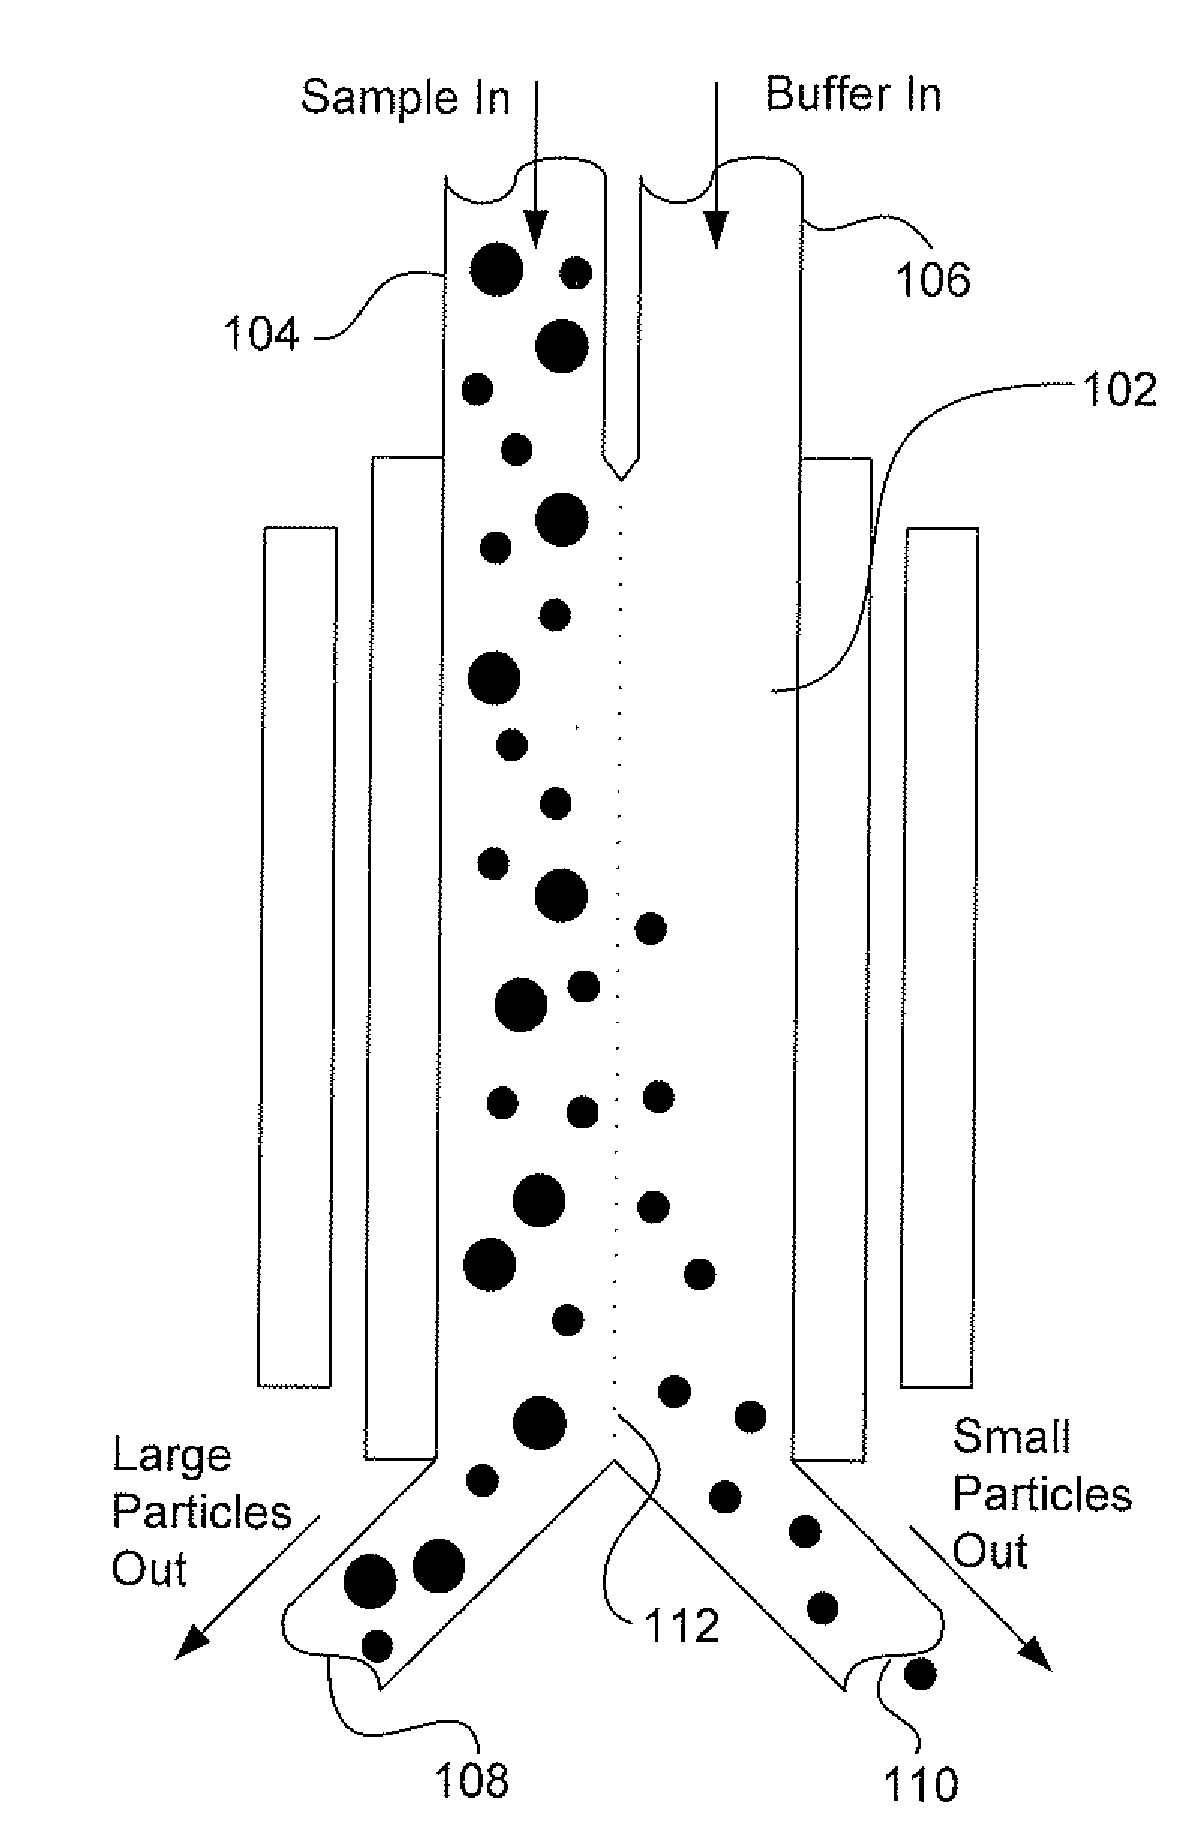 Systems and Methods for Separating Particles and/or Substances from a Sample Fluid